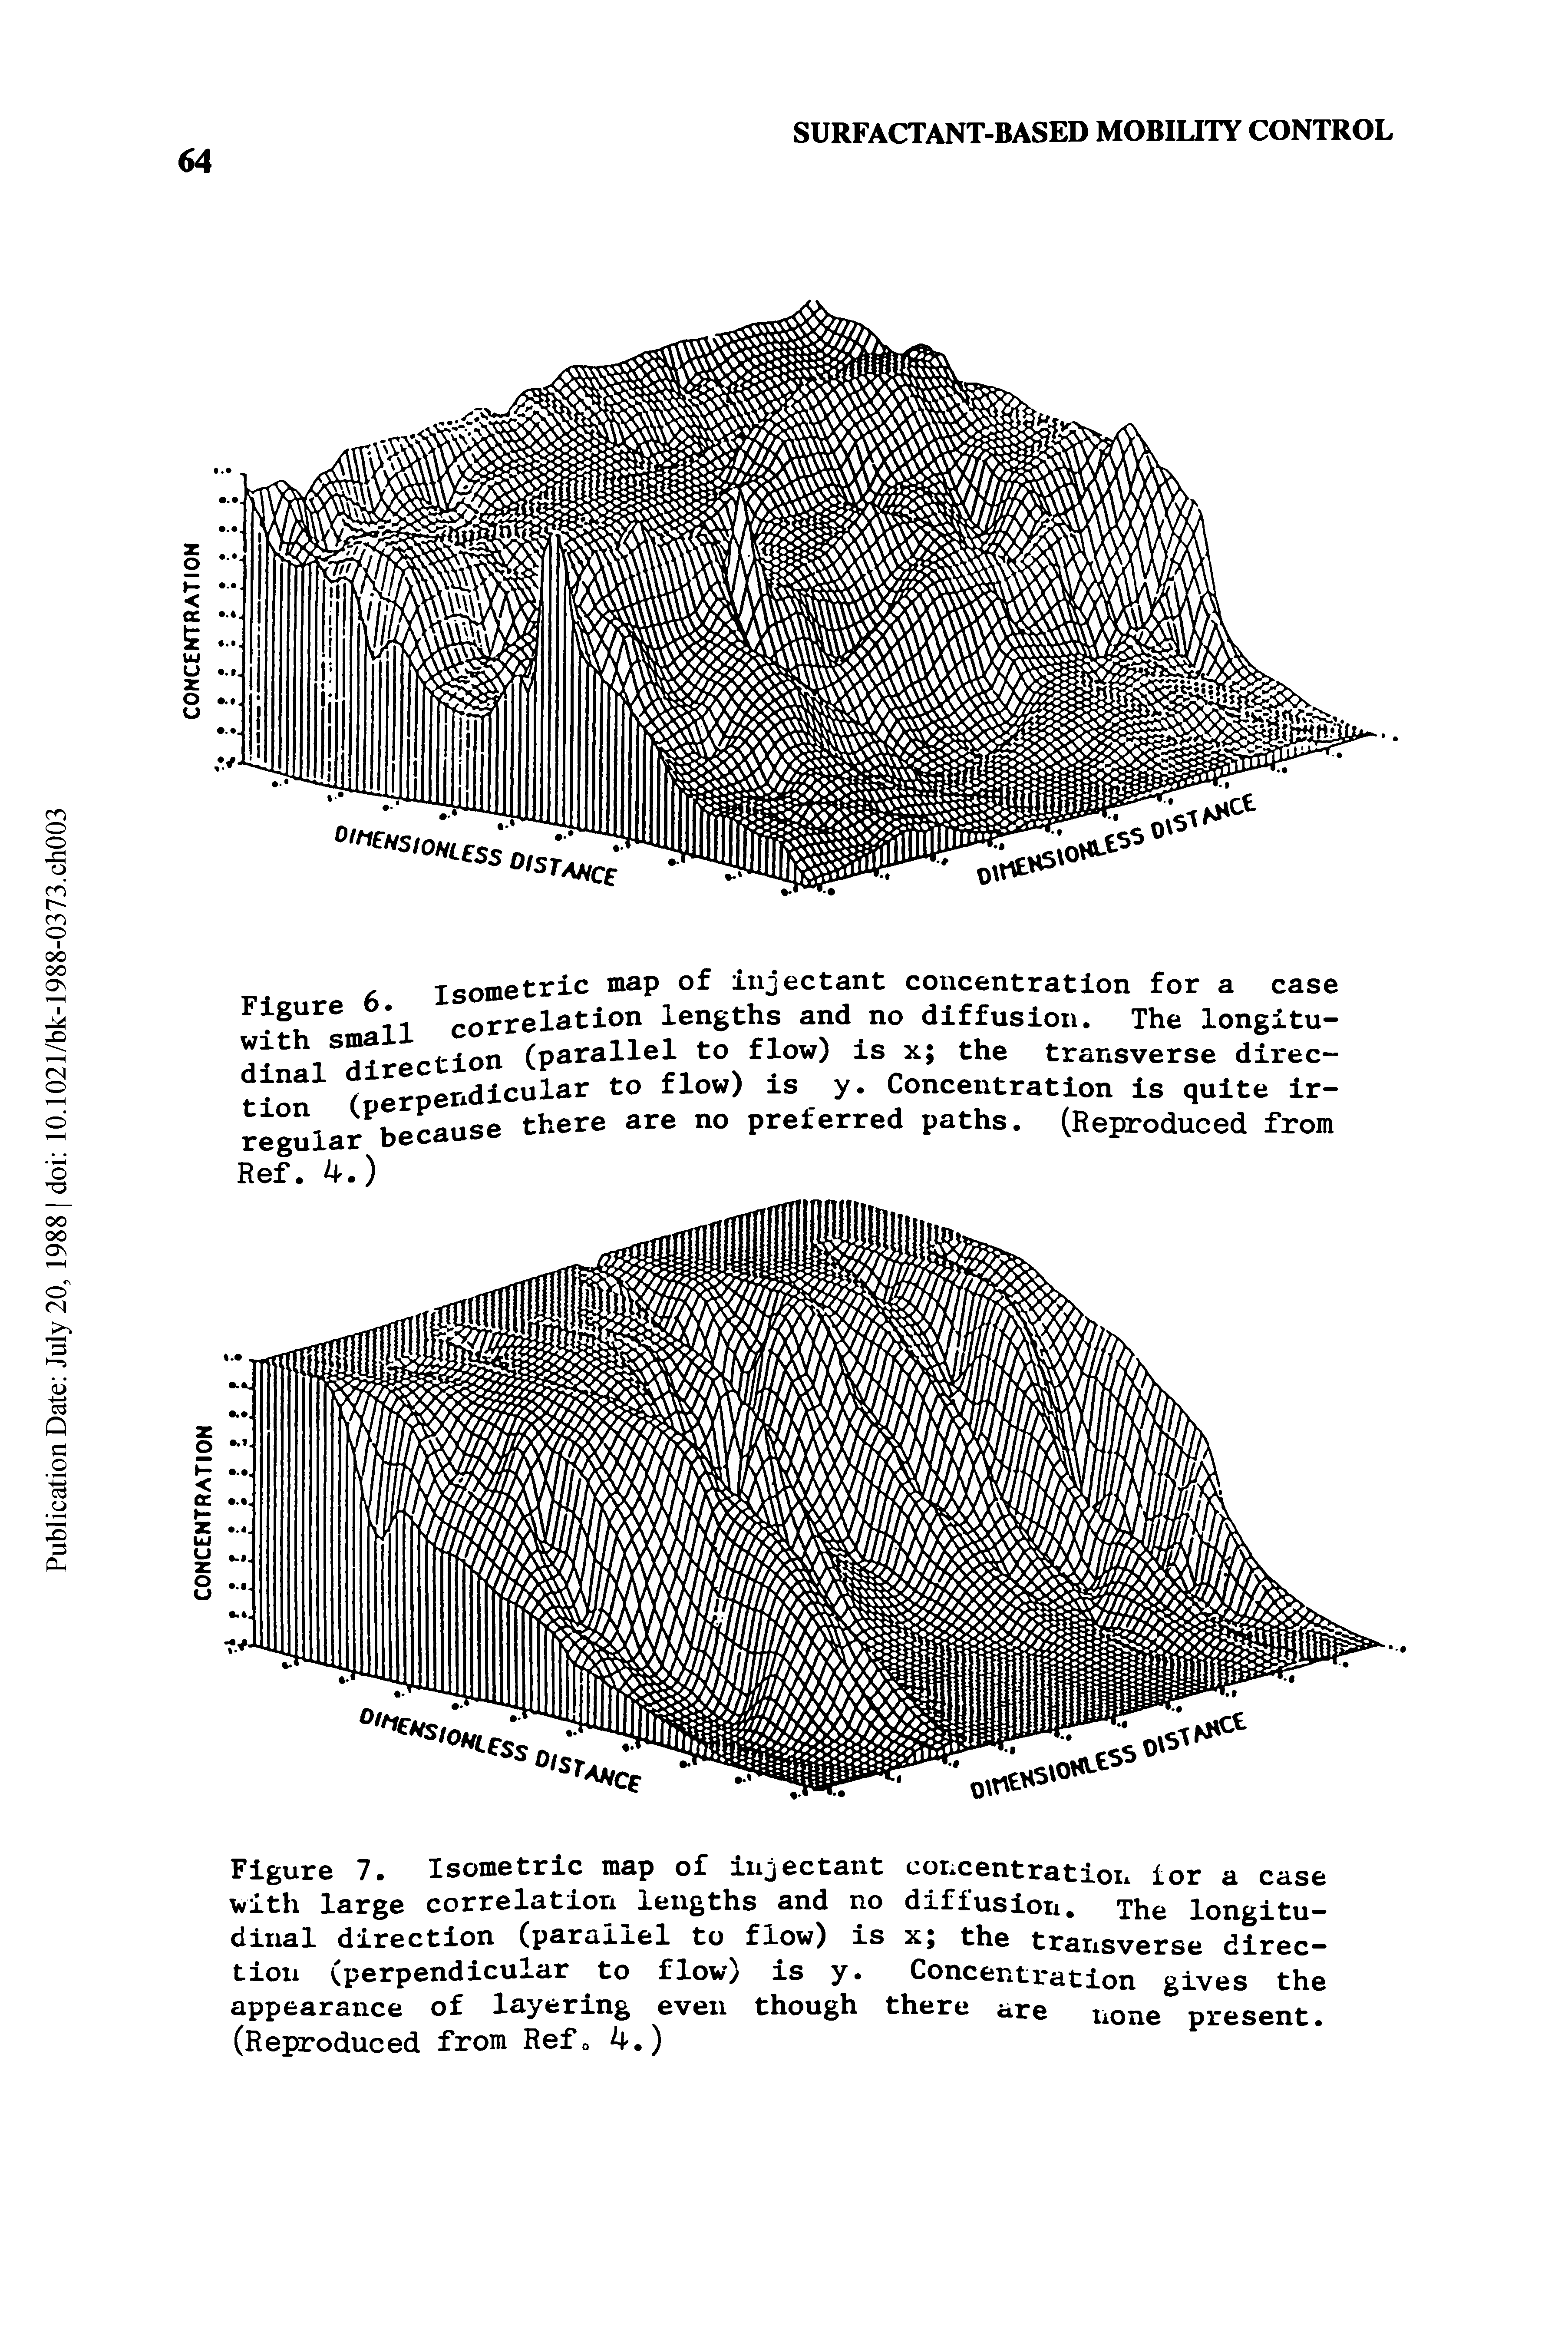 Figure 7. Isometric map of iujectant cor centratiou tor a case with large correlation lengths and no diffusioii. The longitudinal direction (parallel to flow) is x the transverse direction (perpendicular to flow) is y. Concentration gives the appearance of layering even though there are none present. (Reproduced from Refo. )...